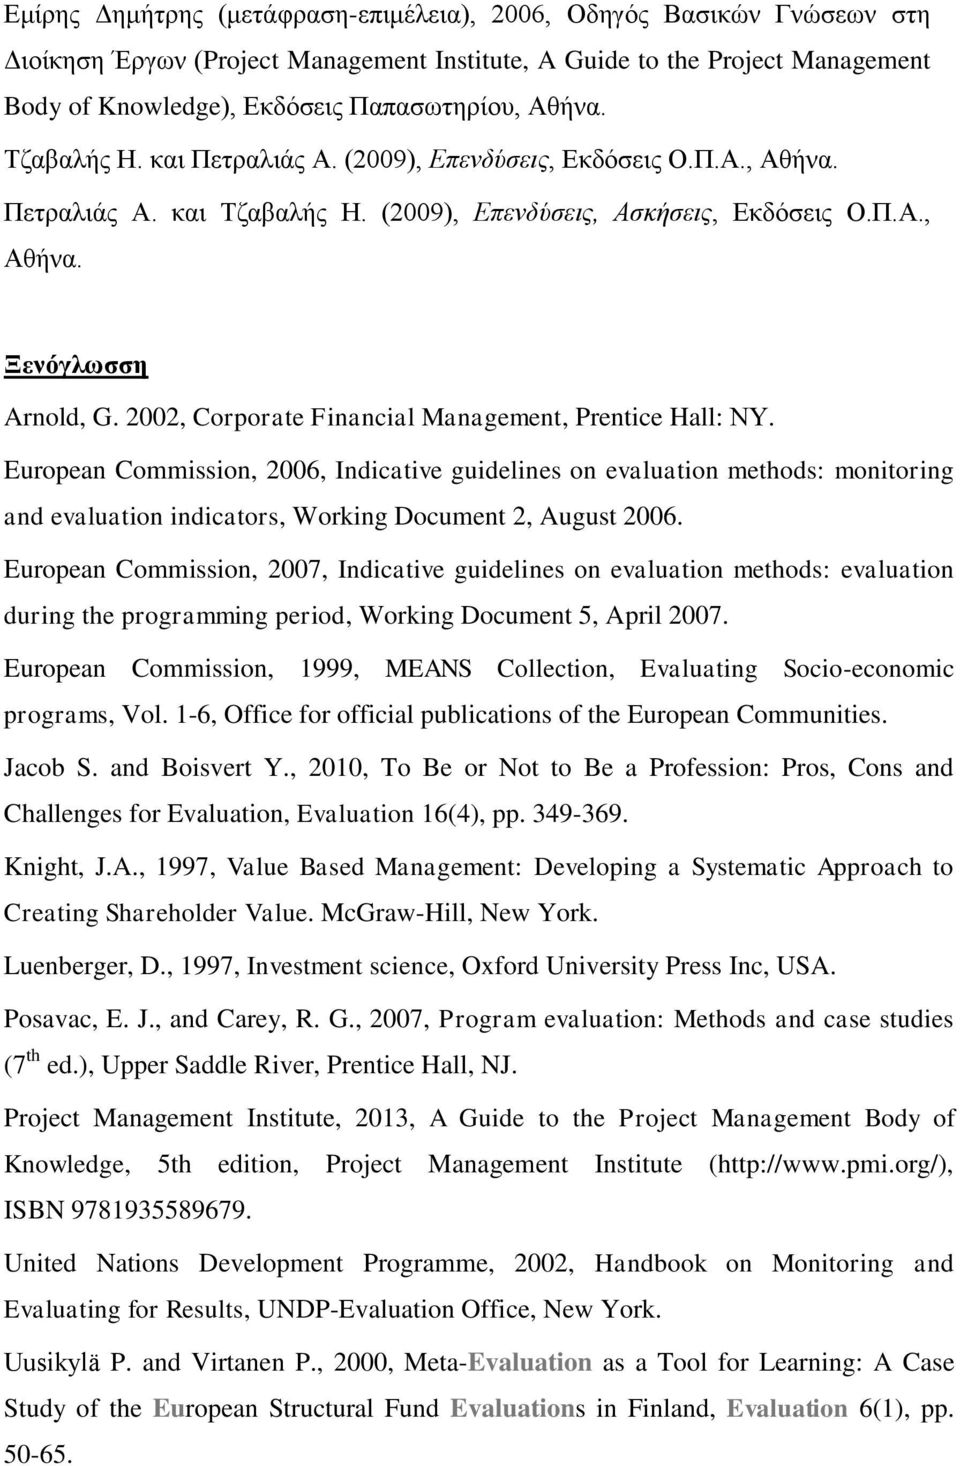 2002, Corporate Financial Management, Prentice Hall: ΝΥ. European Commission, 2006, Indicative guidelines on evaluation methods: monitoring and evaluation indicators, Working Document 2, August 2006.